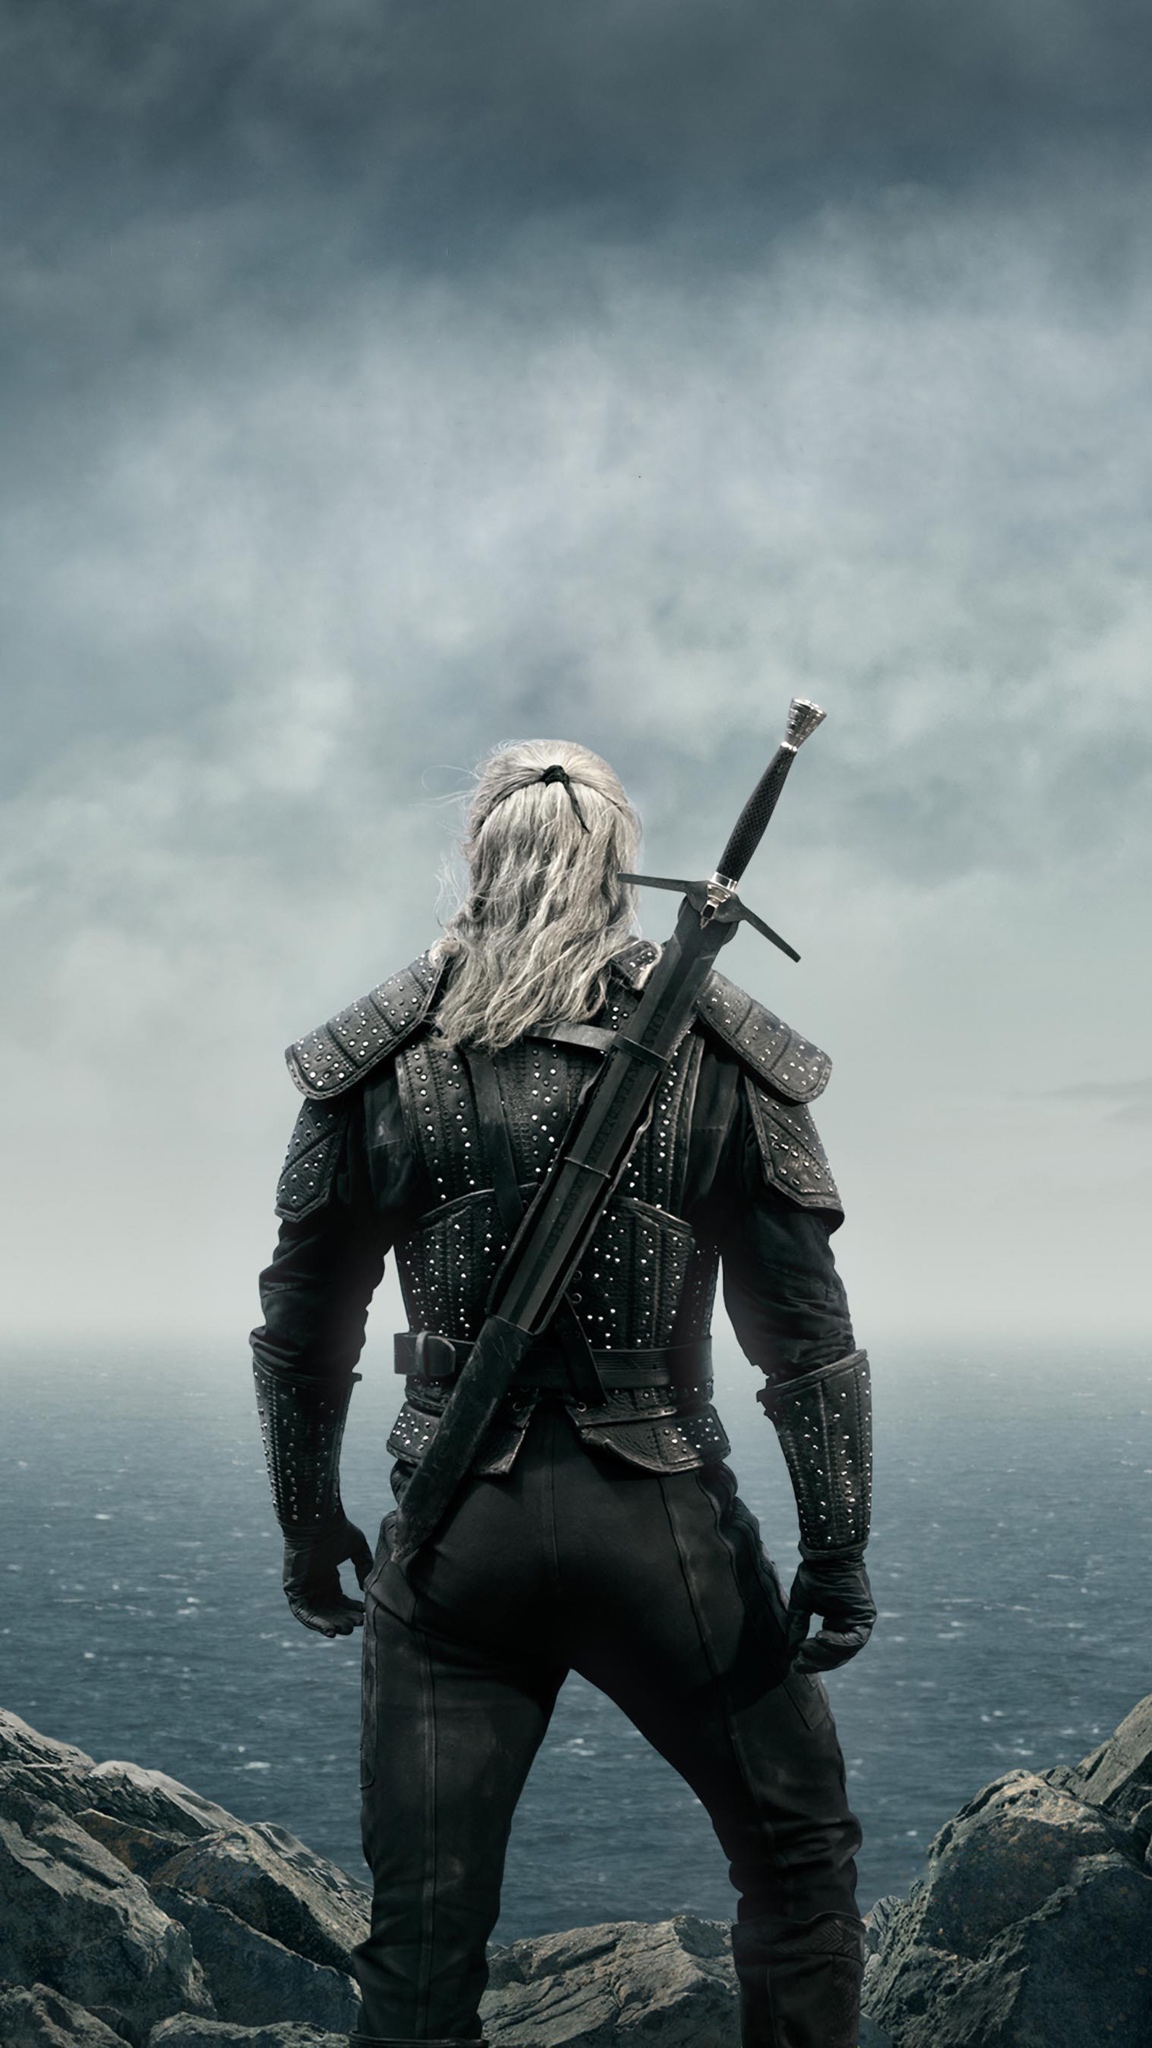 The Witcher TV Series Netflix TV Series The Witcher Nightmare Of The Wolf  Geralt Of Rivia Ultrawide Wallpaper - Resolution:3325x1260 - ID:1383795 -  wallha.com